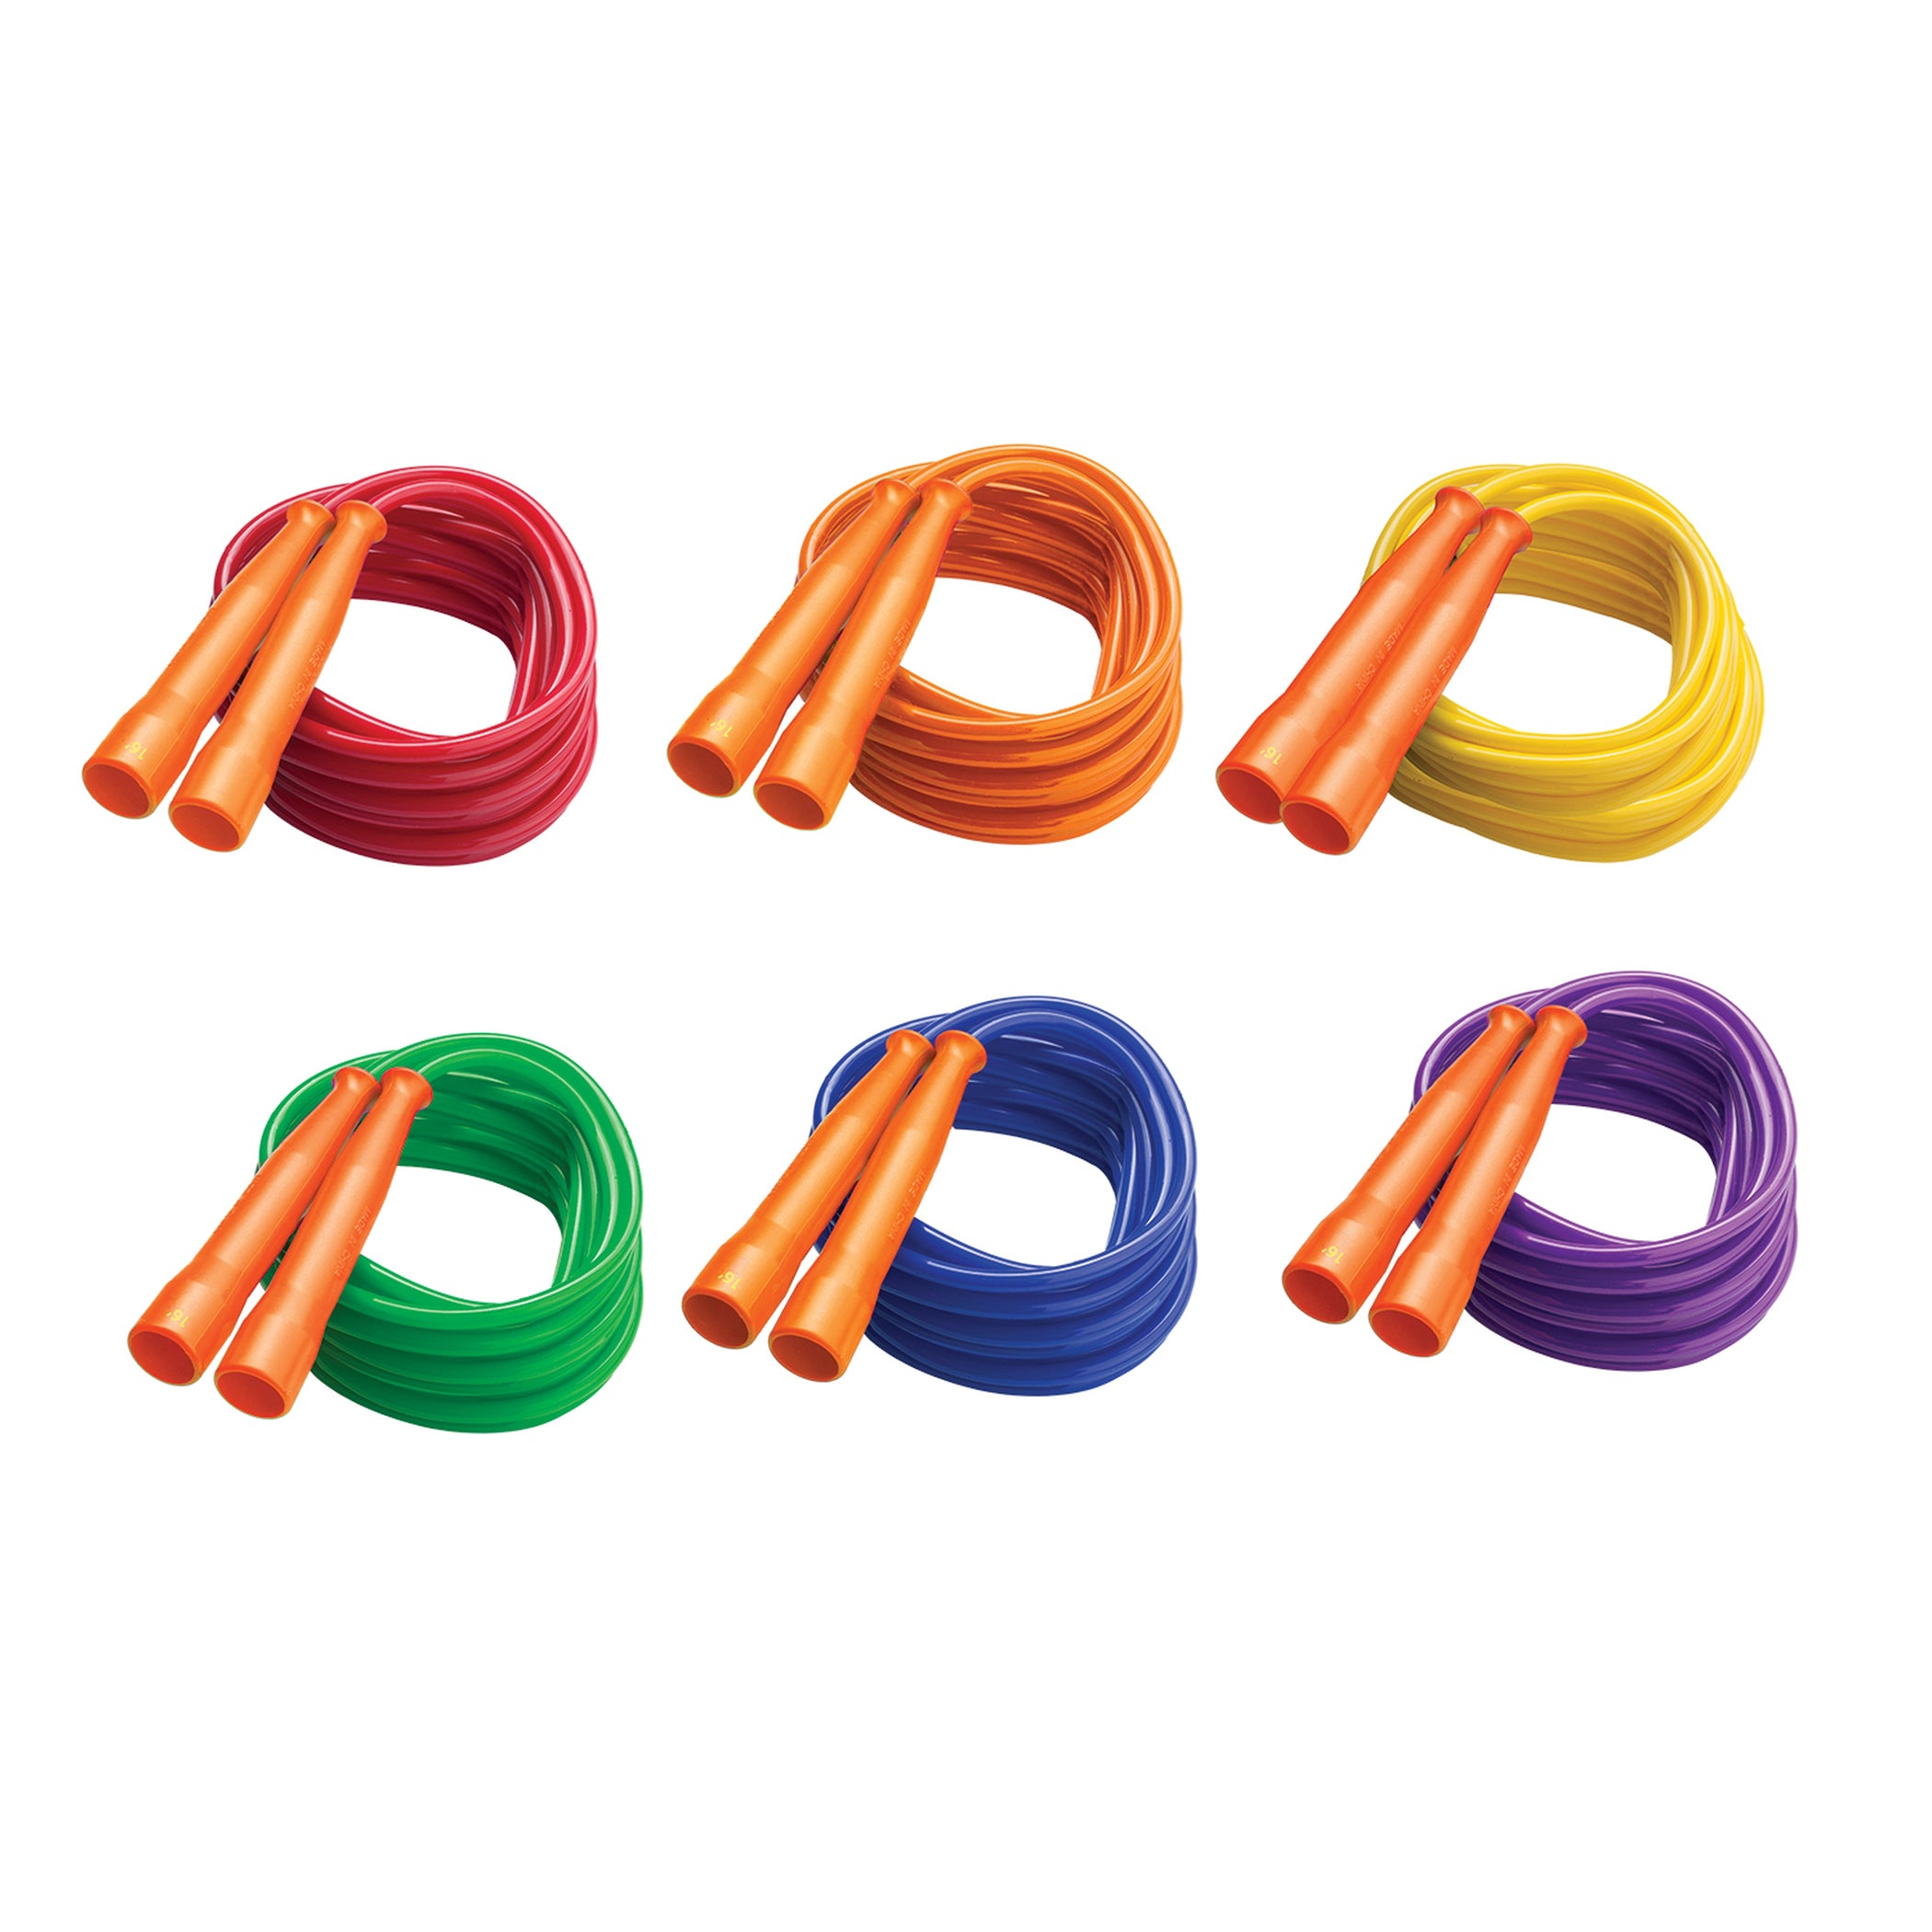 Licorice Speed Jump Rope, 16' with Orange Handles, Pack of 6 - A1 School Supplies